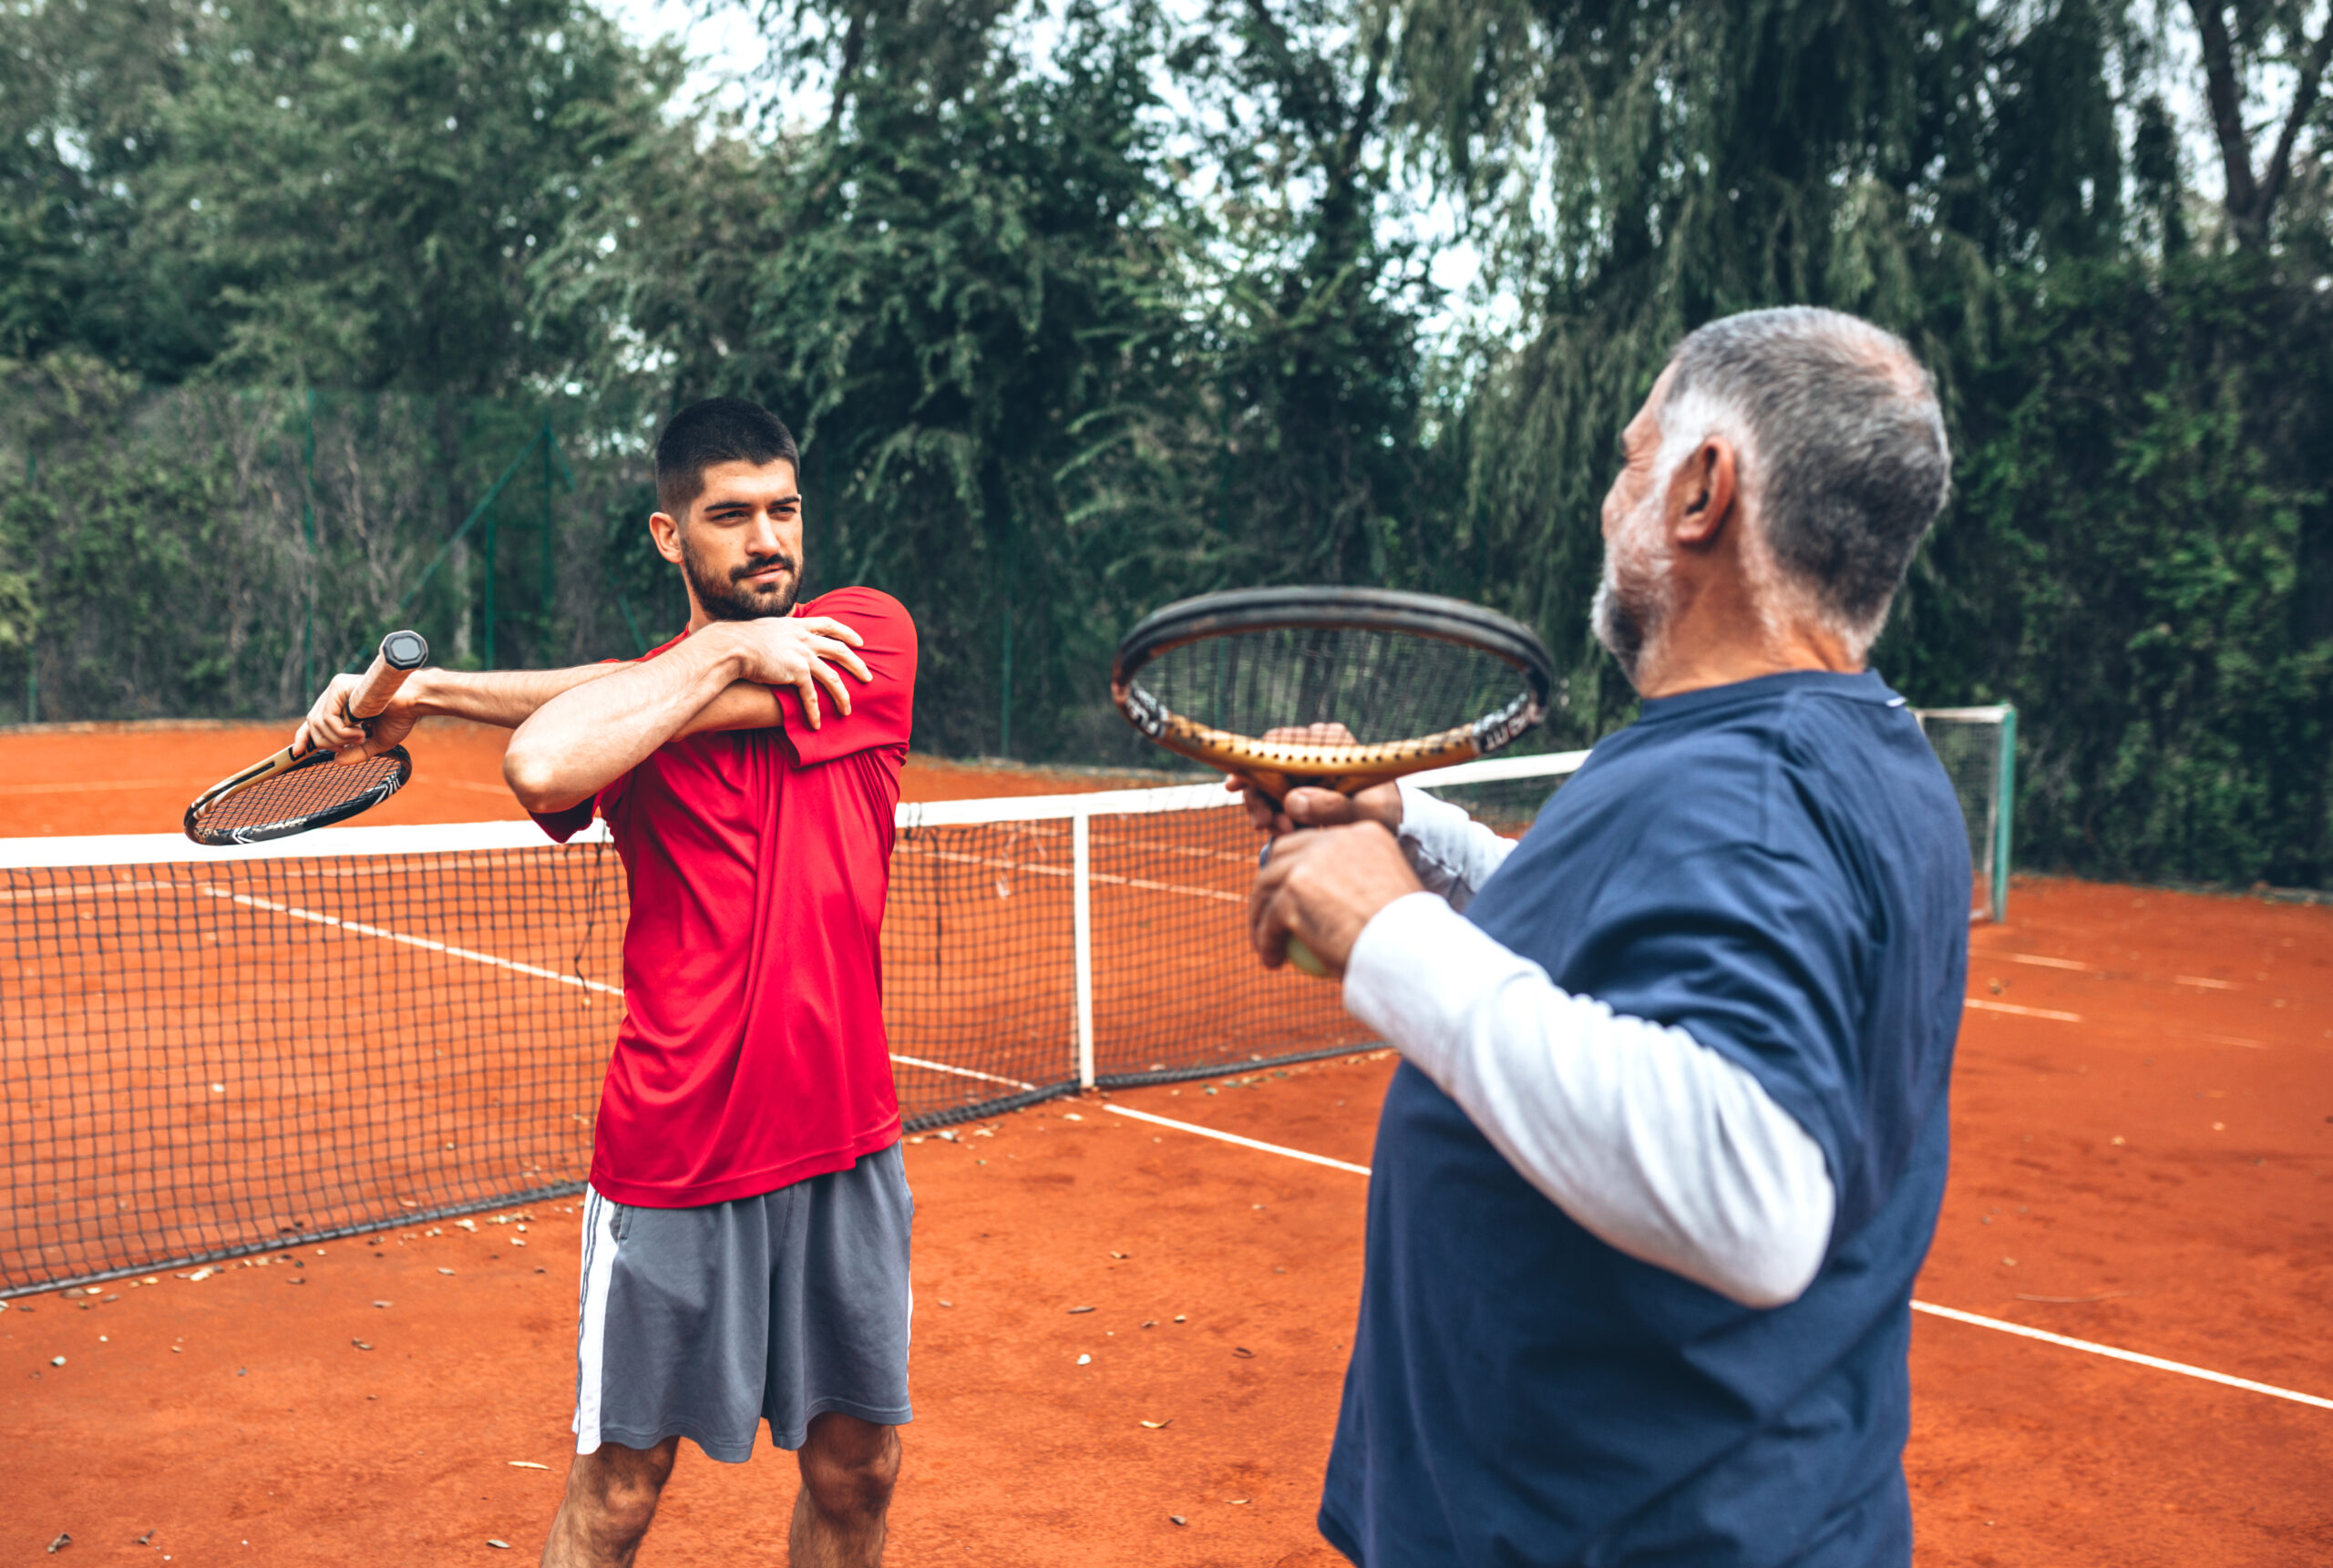 Warm-ups Help Prevent Joint Injury When Playing Tennis and Golf